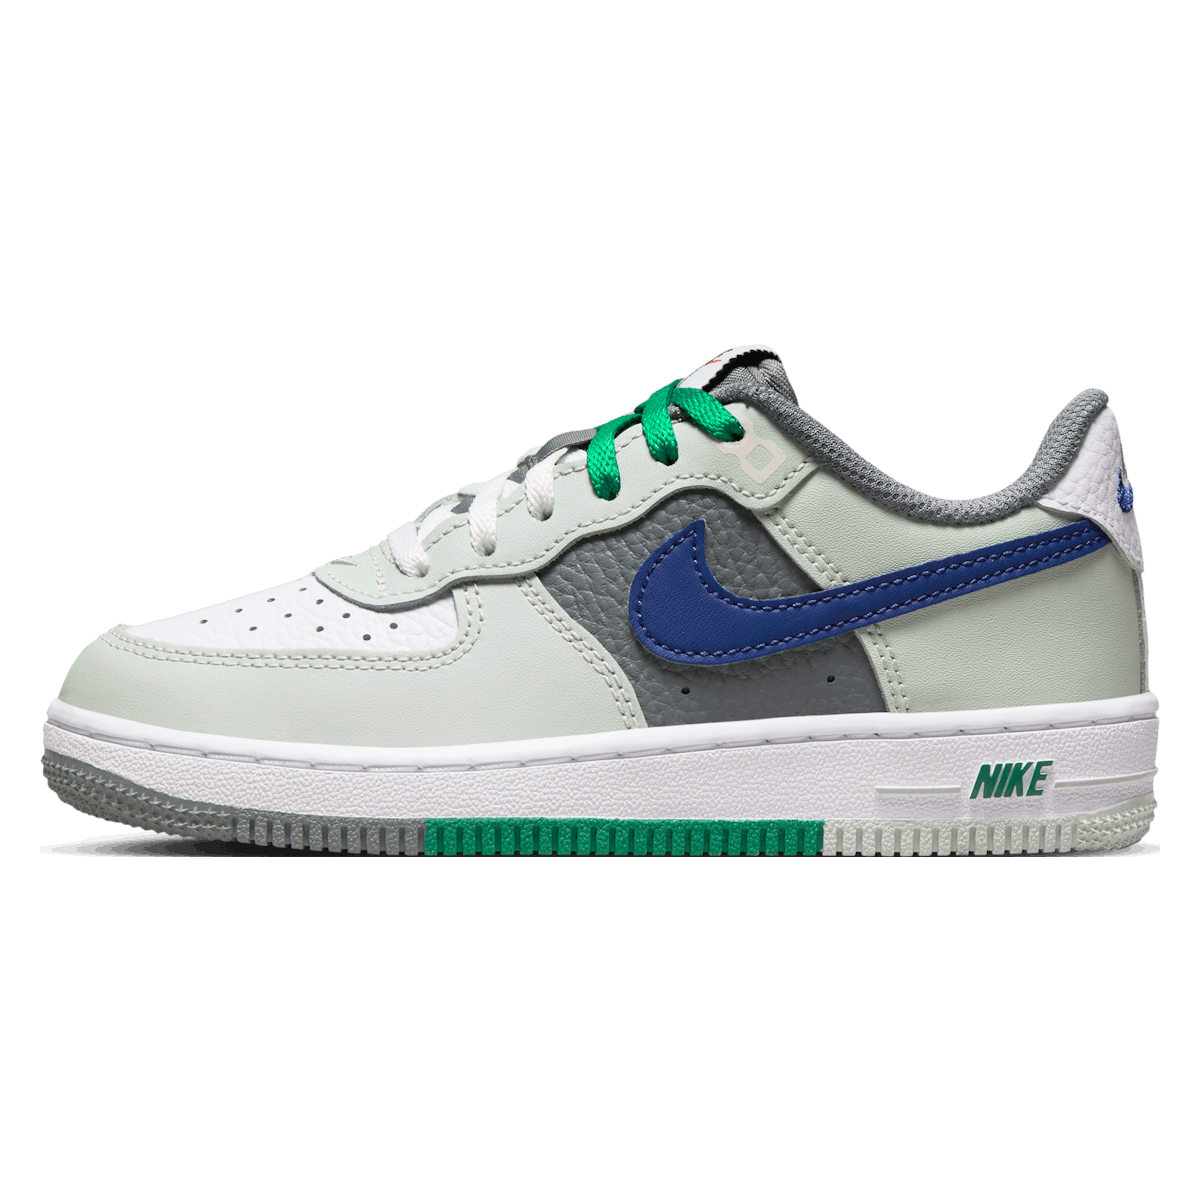 Nike Force 1 LV8 PS "Light Silver"